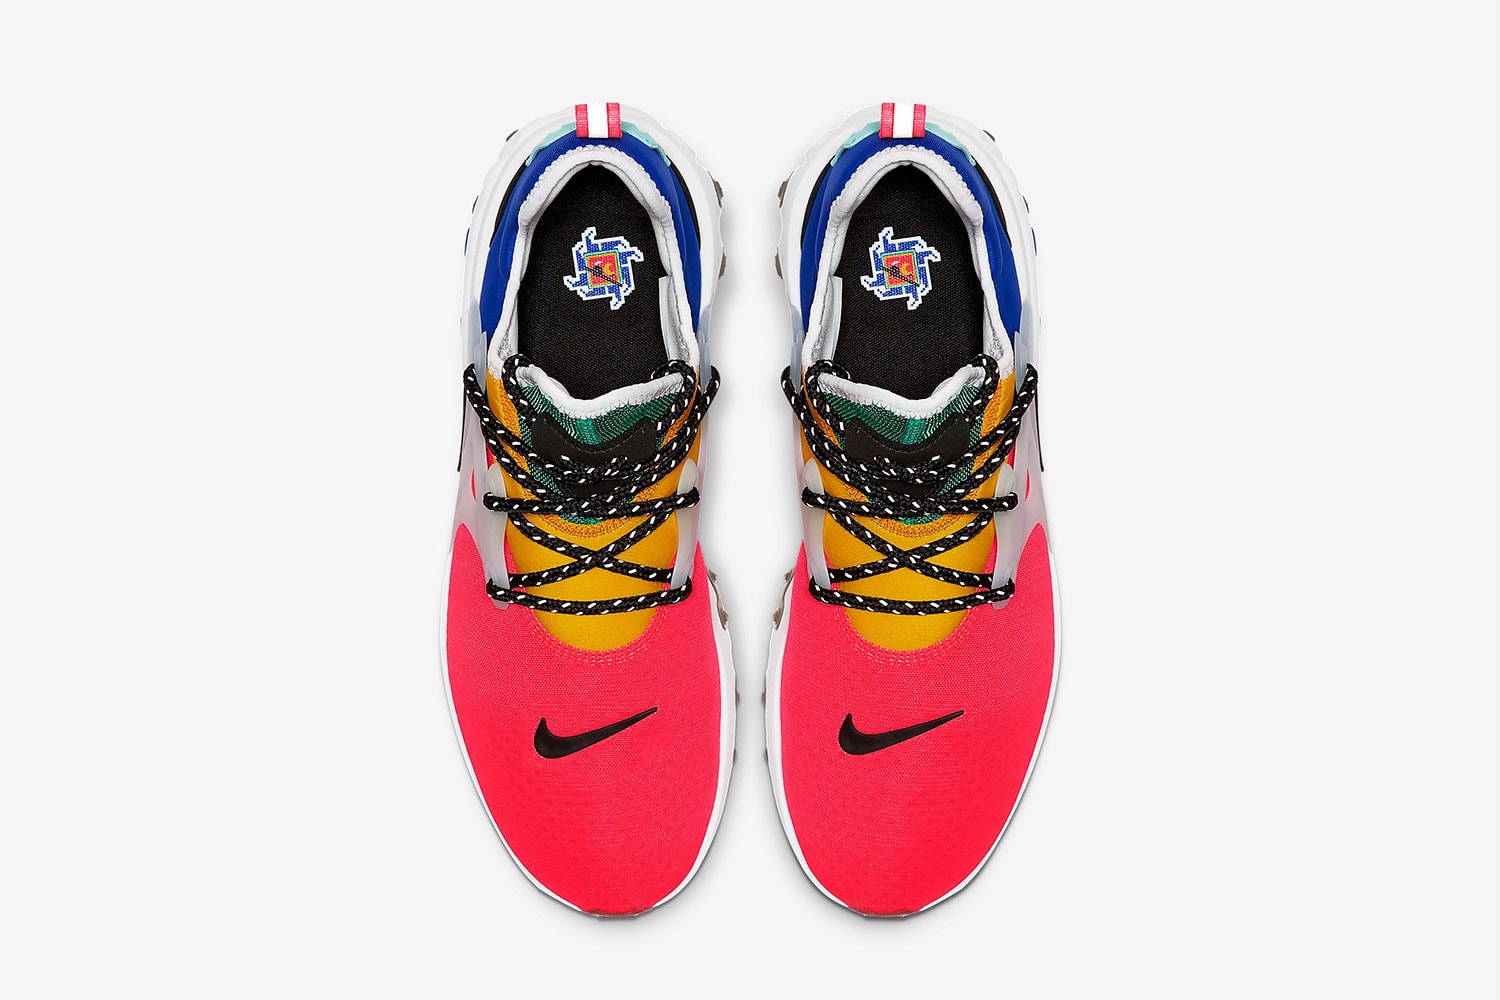 Nike React Presto Track Red Racing Blue Black CK2956-601 Shoes Sneakers Trainers Shoes kicks fashion 